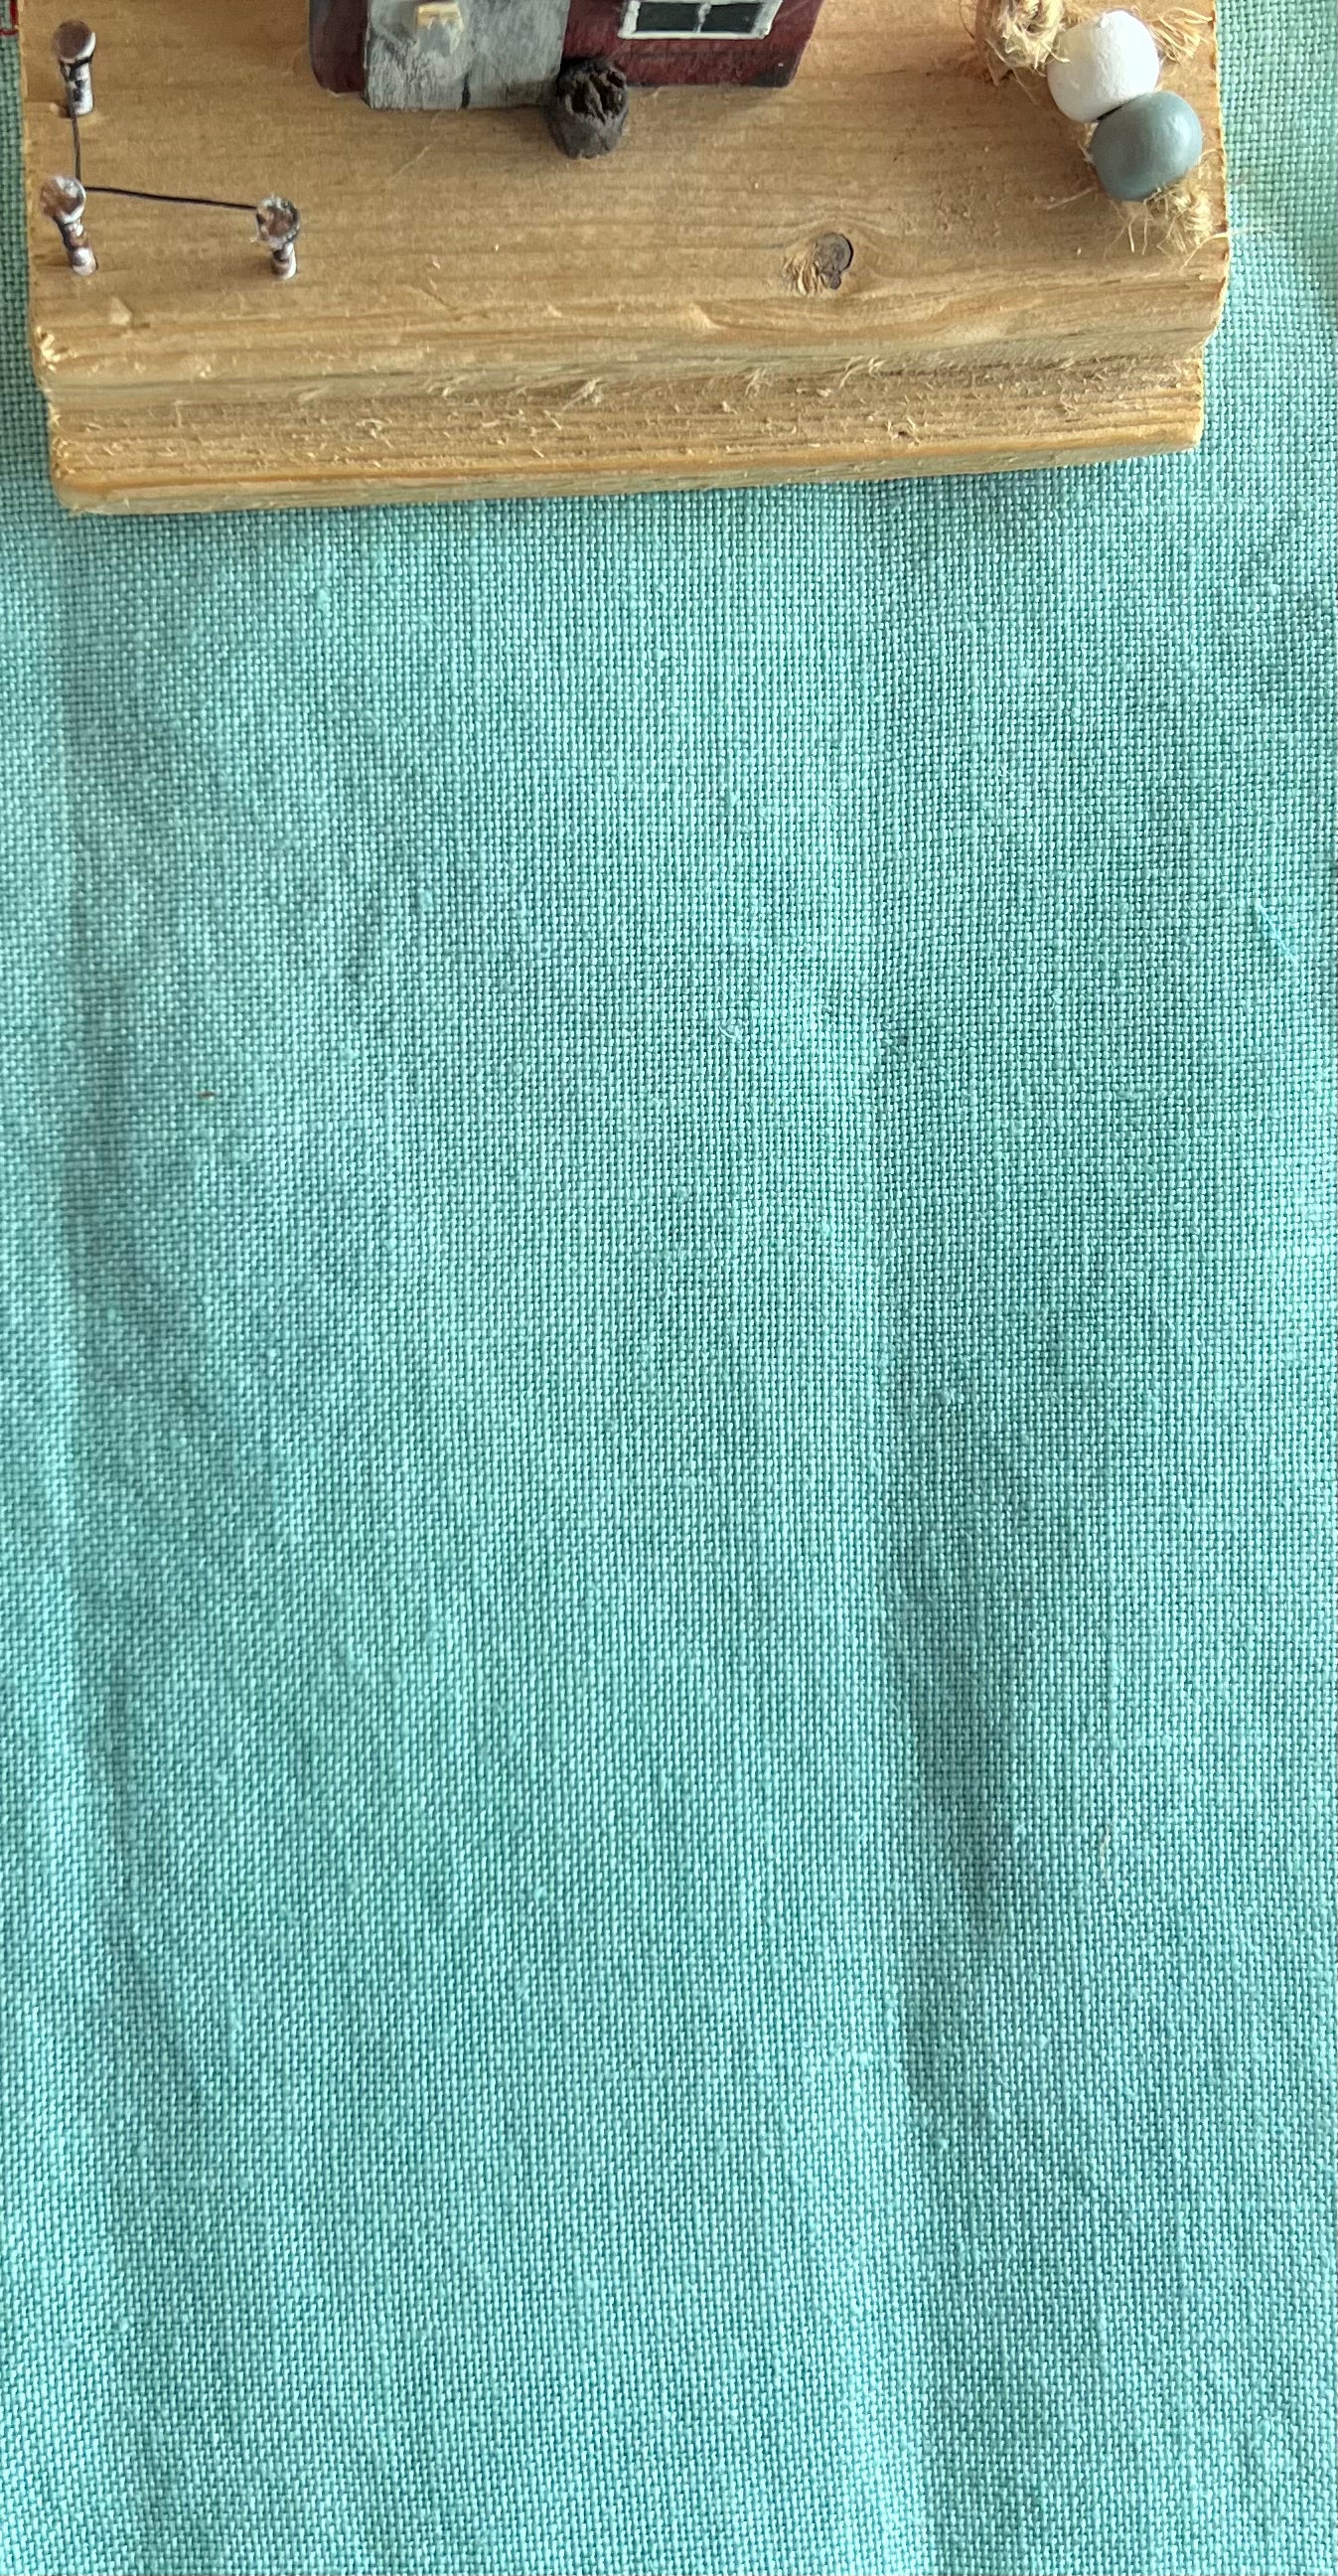 36 Count Linen 'Mermaid's Tail' Hand Dyed Cross Stitch Fabric